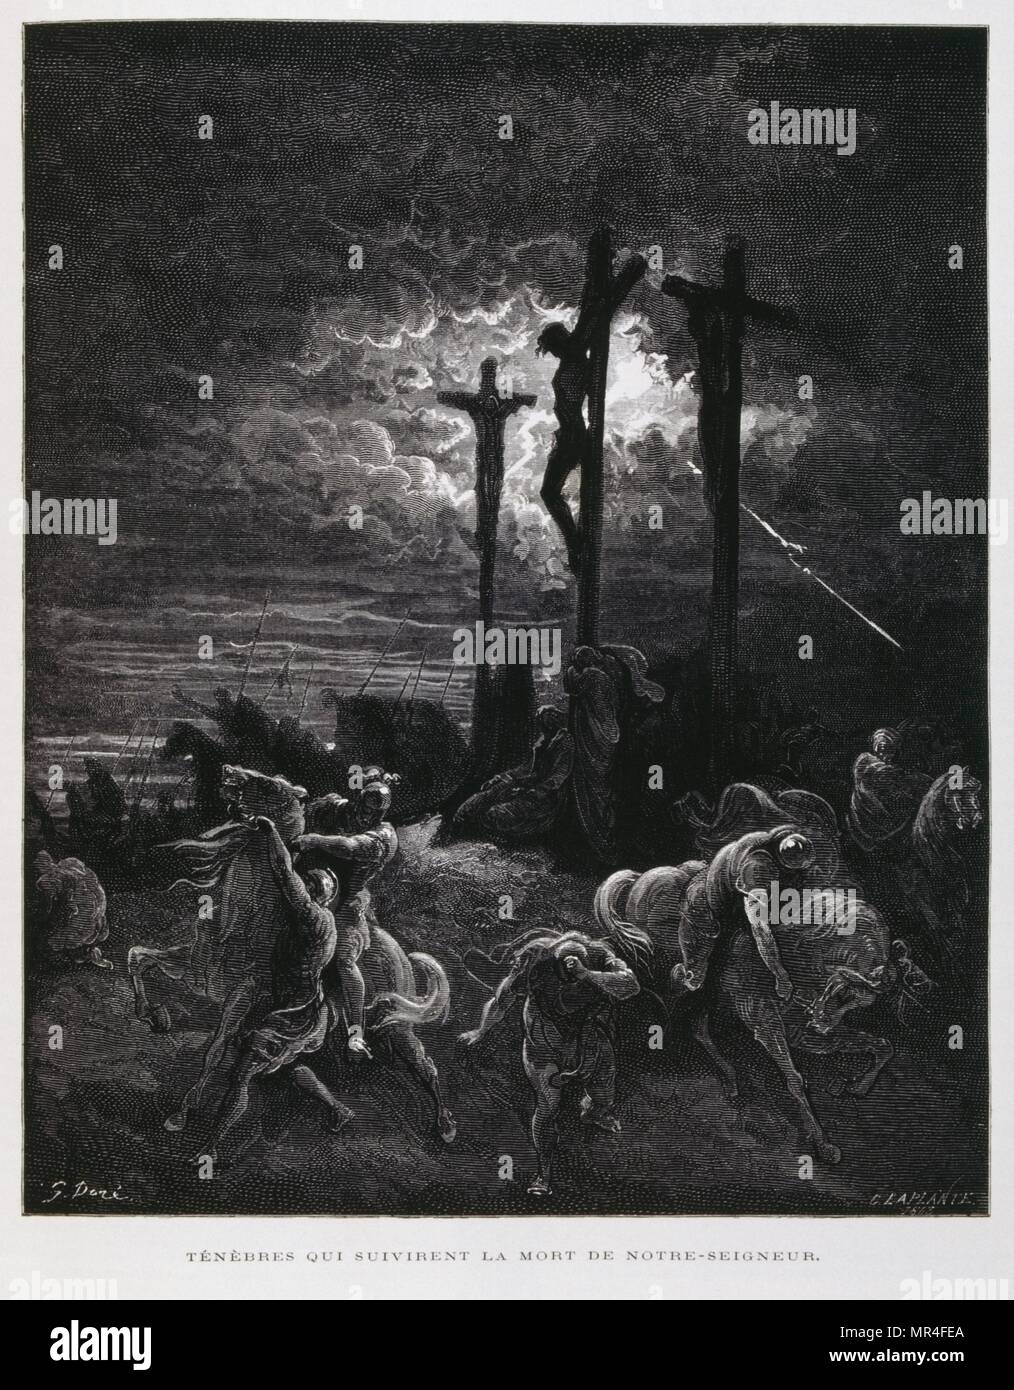 The crucifixion of Christ, Illustration from the Dore Bible 1866. In 1866, the French artist and illustrator Gustave Dore (1832–1883), published a series of 241 wood engravings for a new deluxe edition of the 1843 French translation of the Vulgate Bible, popularly known as the Bible de Tours. This new edition was known as La Grande Bible de Tours and its illustrations were immensely successful. Stock Photo